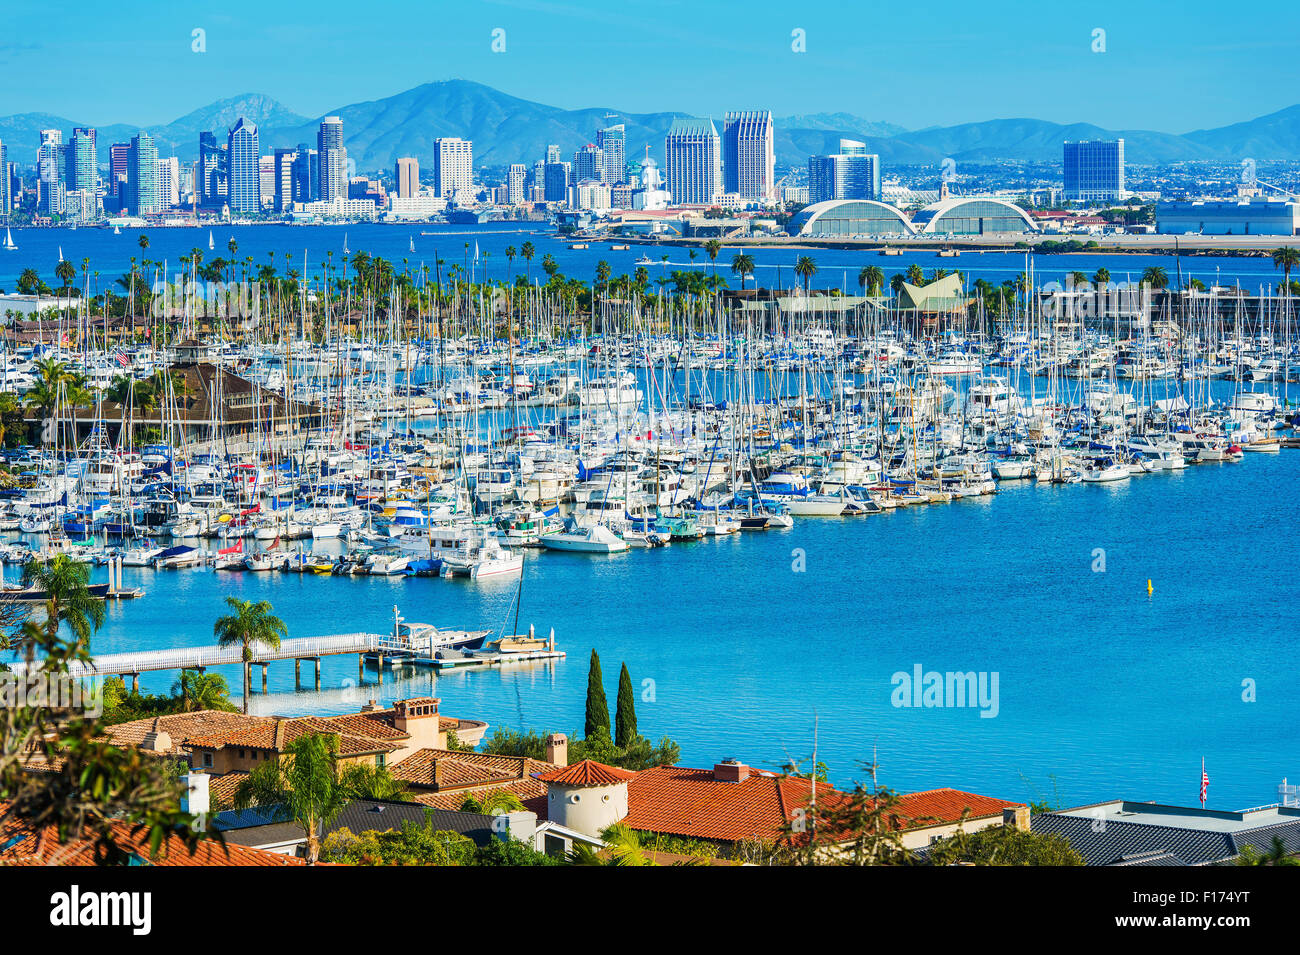 Panorama of San Diego, California, United States. San Diego North Bay, City Skyline, Shelter Island and the Pacific Ocean Blue Stock Photo